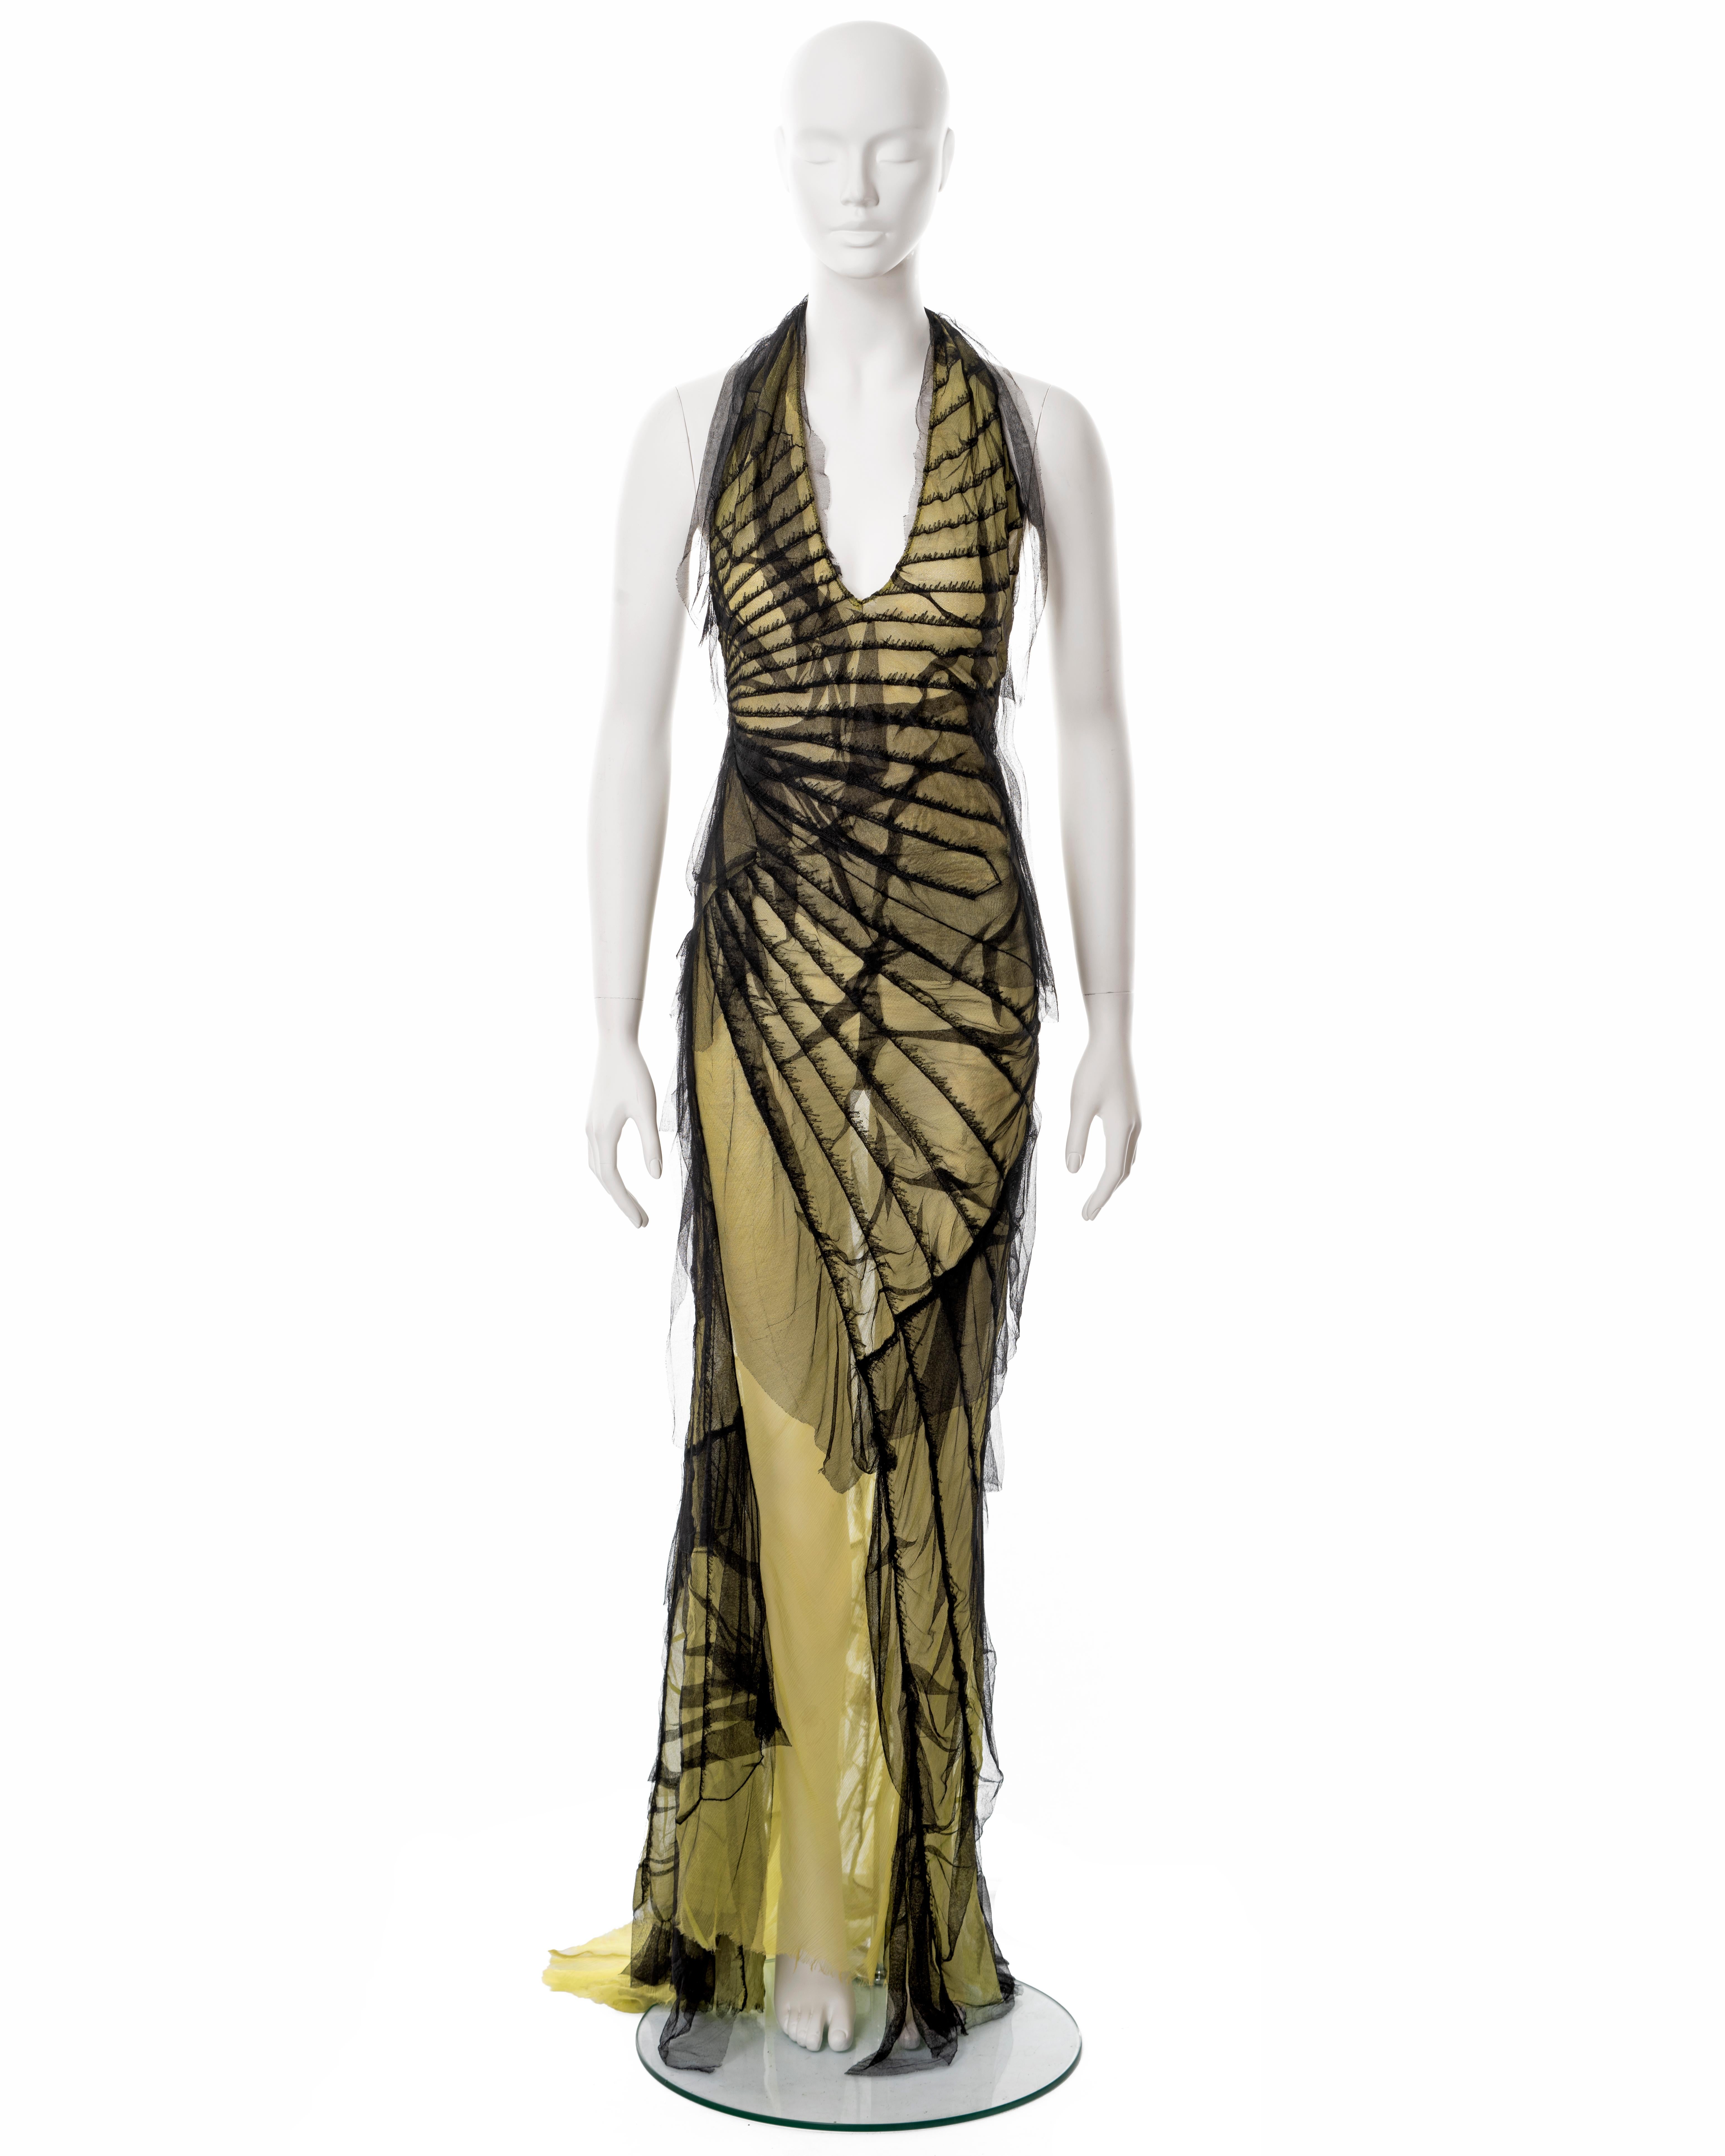 ▪ Roberto Cavalli deconstructed evening dress
▪ Sold by One of a Kind Archive
▪ Spring-Summer 2001
▪ Constructed from shredded black silk net with lime underlay 
▪ Multiple bias-cut panels 
▪ Open low back 
▪ Floor-length skirt with train 
▪ 100%